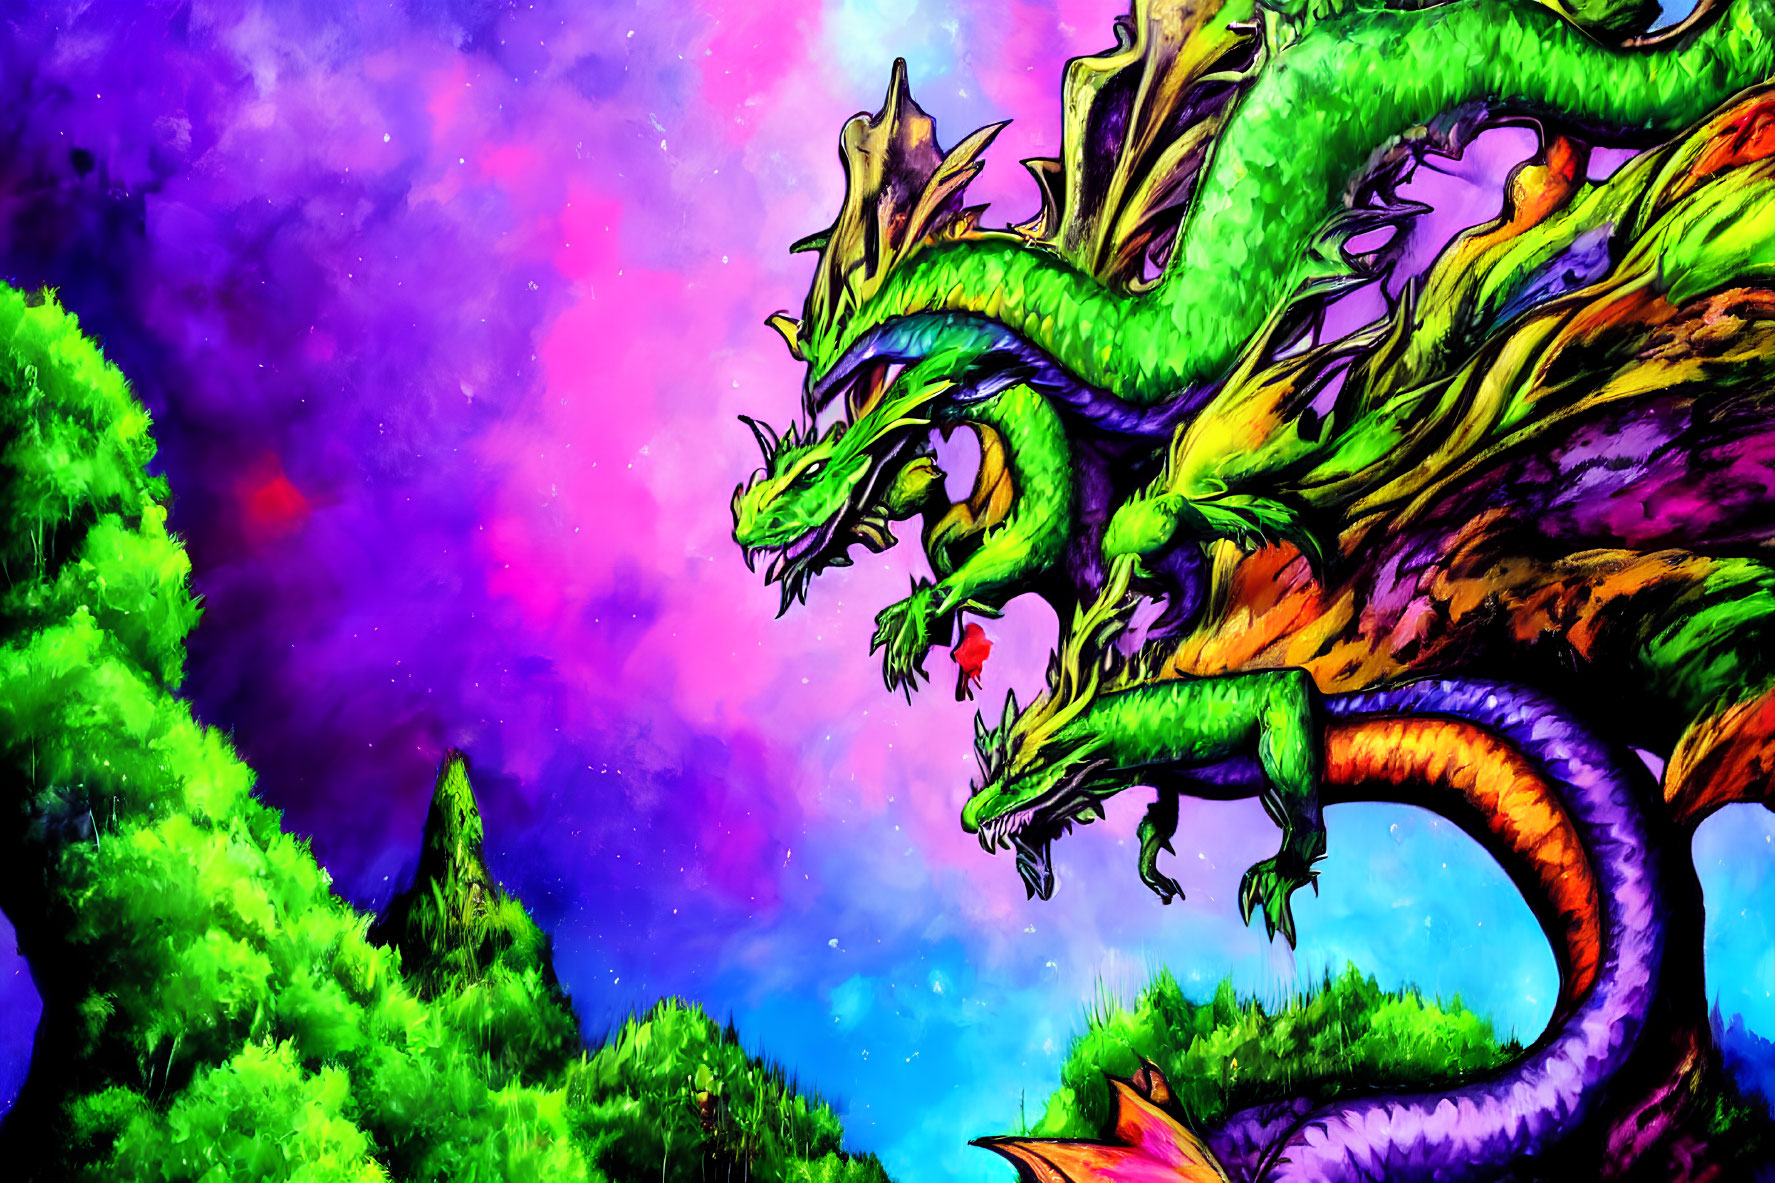 Colorful Three-Headed Dragon Artwork Above Forest and Nebula Sky